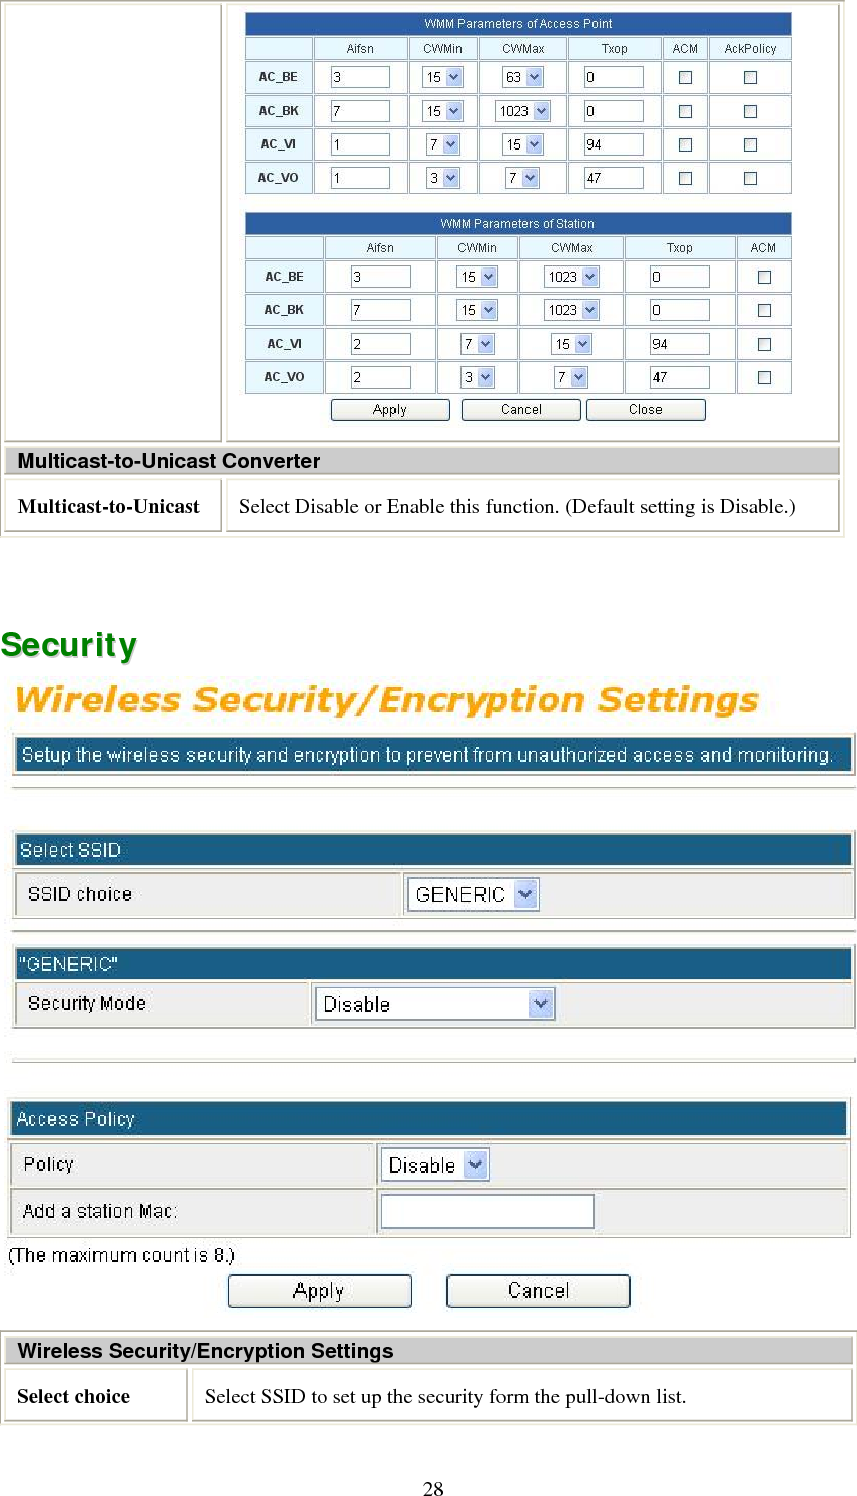   28 Multicast-to-Unicast Converter Multicast-to-Unicast  Select Disable or Enable this function. (Default setting is Disable.)   SSeeccuurriittyy   Wireless Security/Encryption Settings Select choice  Select SSID to set up the security form the pull-down list. 